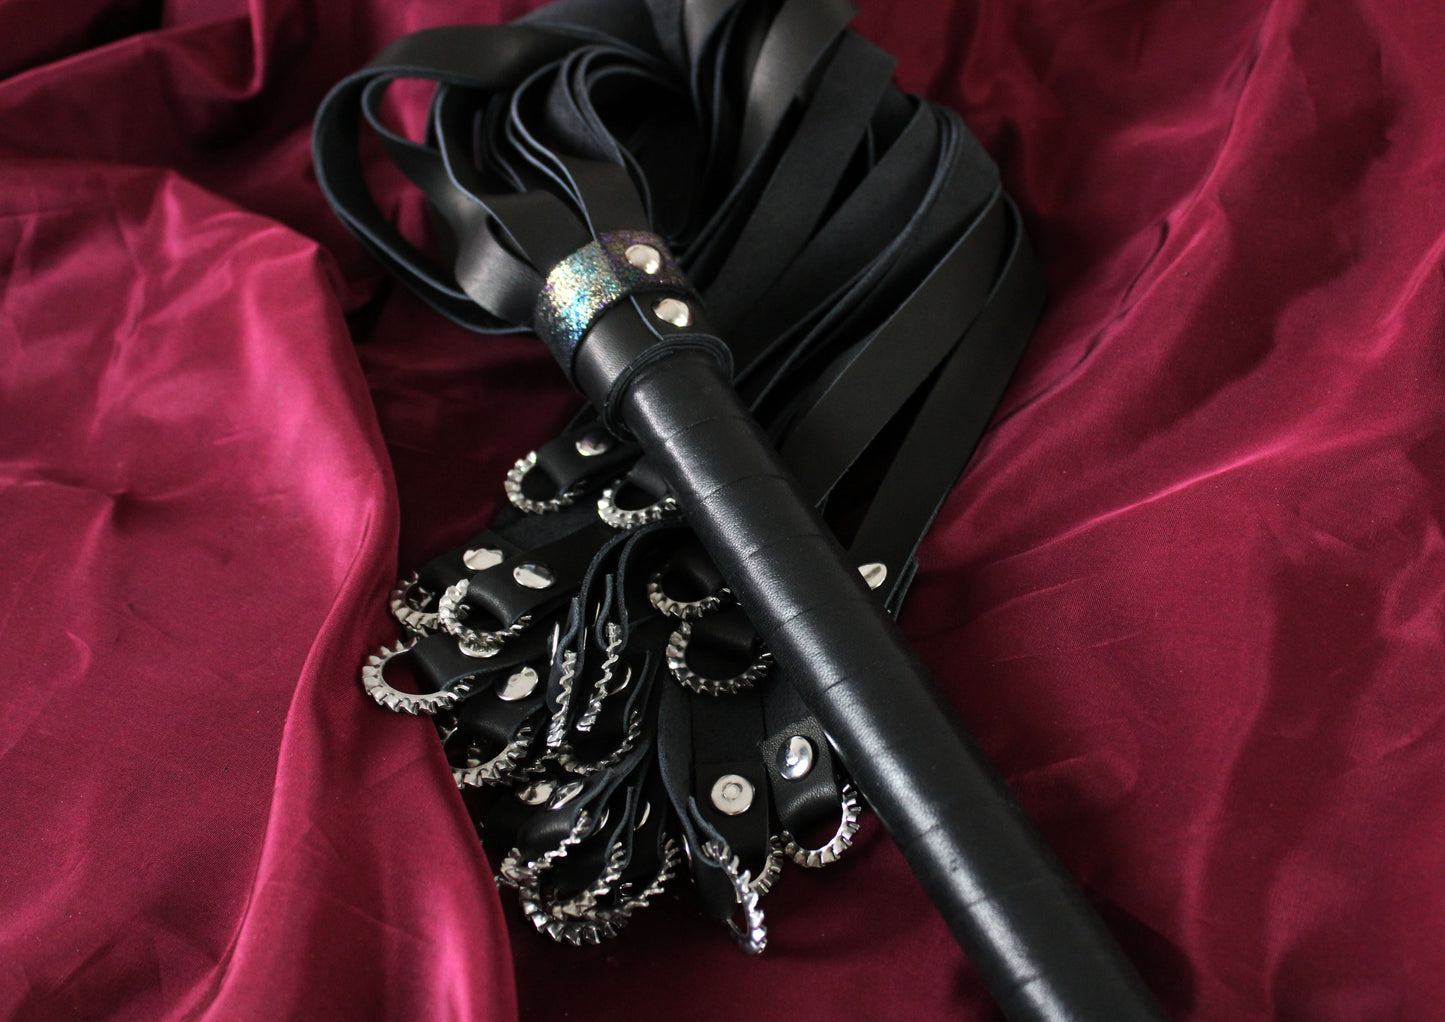 Vampire flogger, steel rings and leather